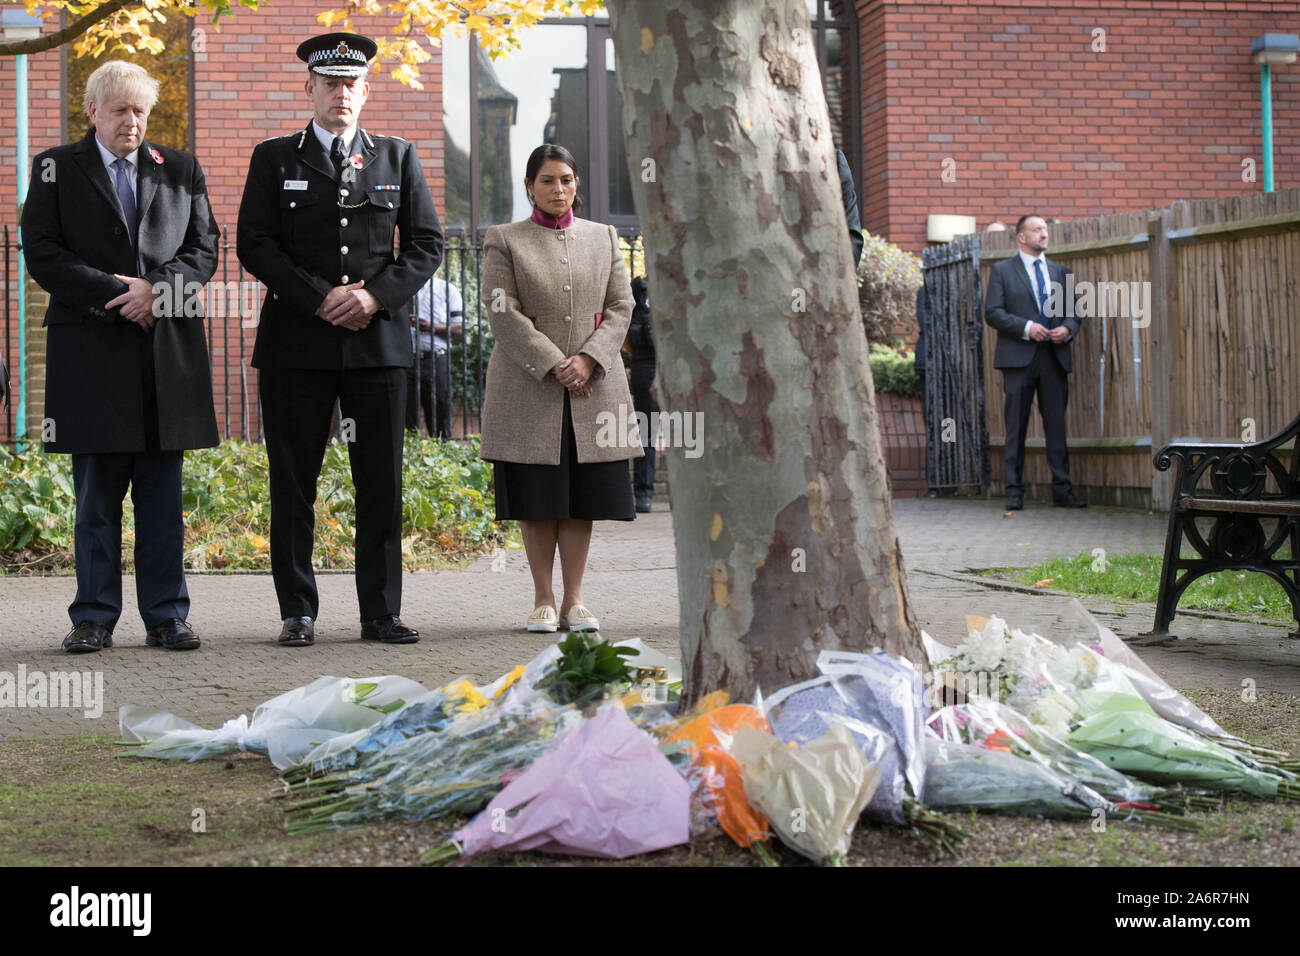 Prime Minister Boris Johnson stands with the Chief Constable of Essex Police, Ben-Julian Harrington and Home Secretary Priti Patel, after laying flowers during a visit to Thurrock Council Offices in Essex after the bodies of 39 people were found in a lorry container last week. Stock Photo